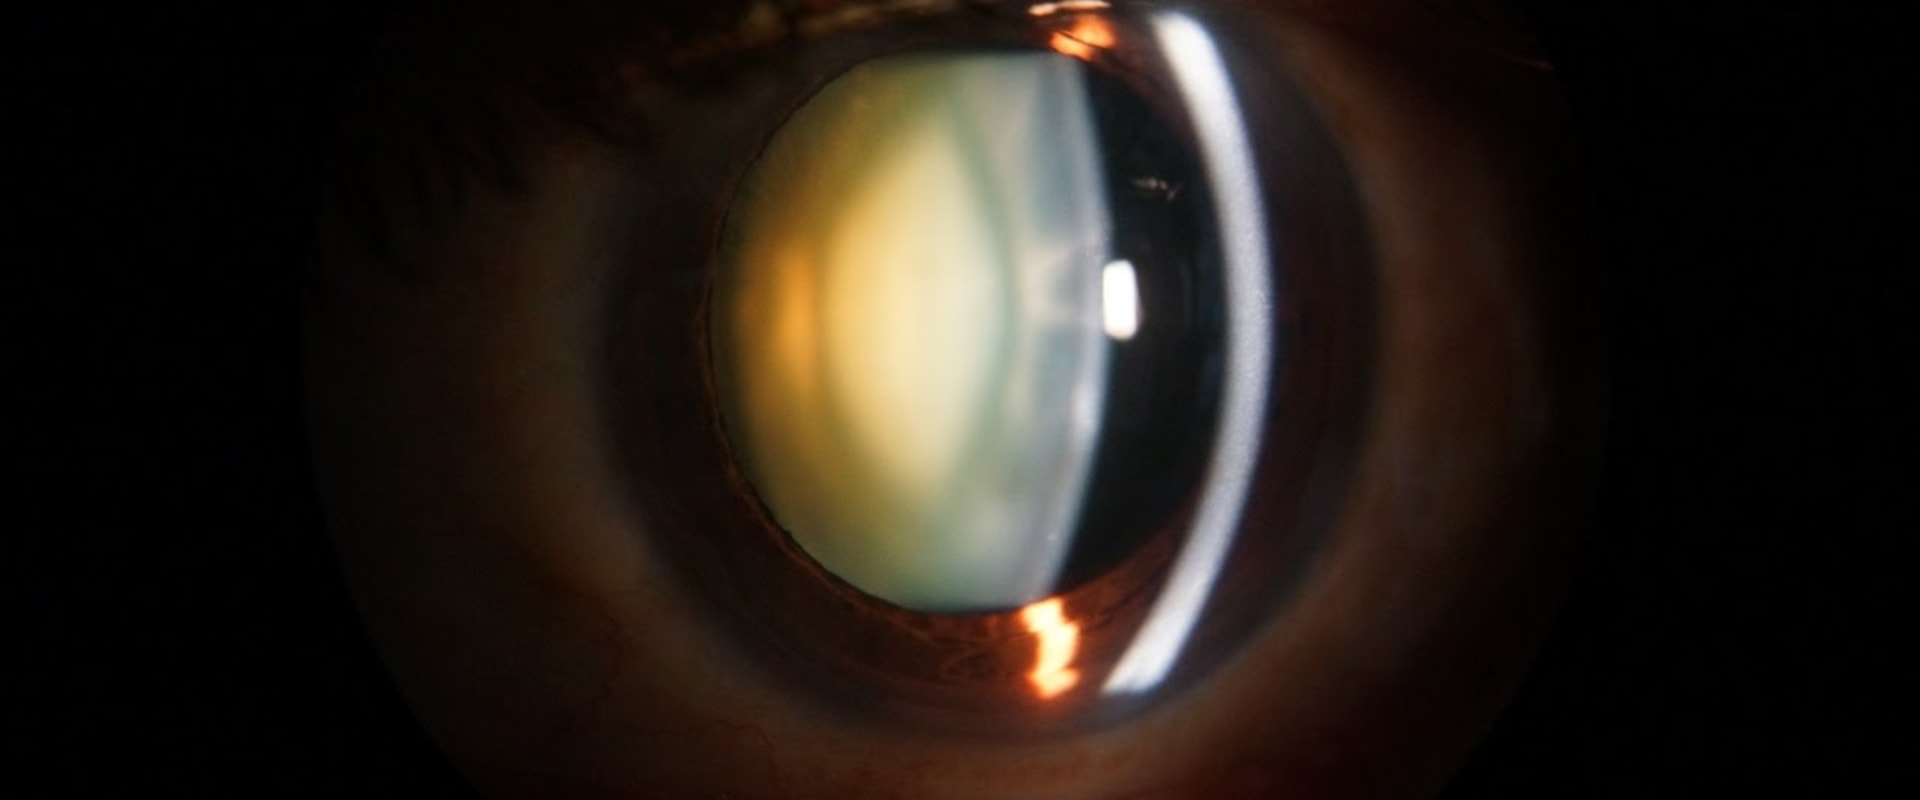 What can be seen on slit lamp?